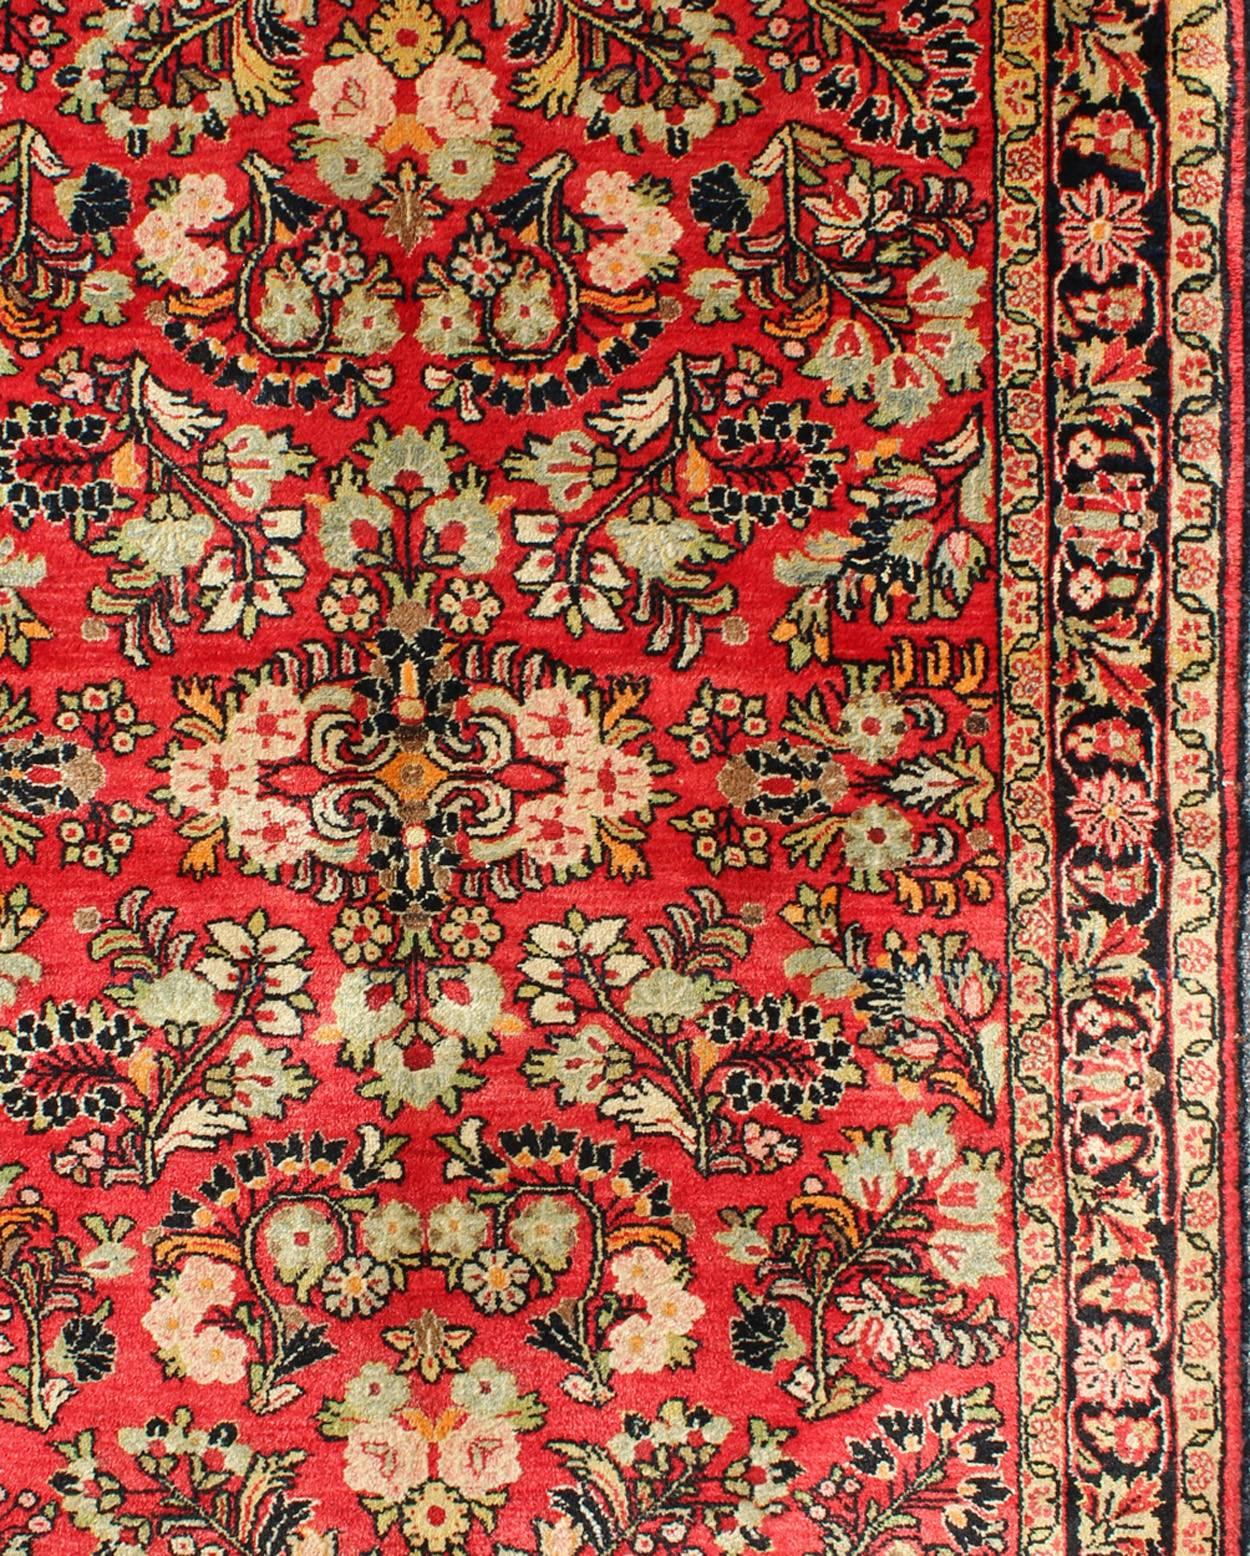 Hand-Knotted Vintage Persian Sarouk Rug with All-Over Floral Design in Rich Red, Onyx Black For Sale